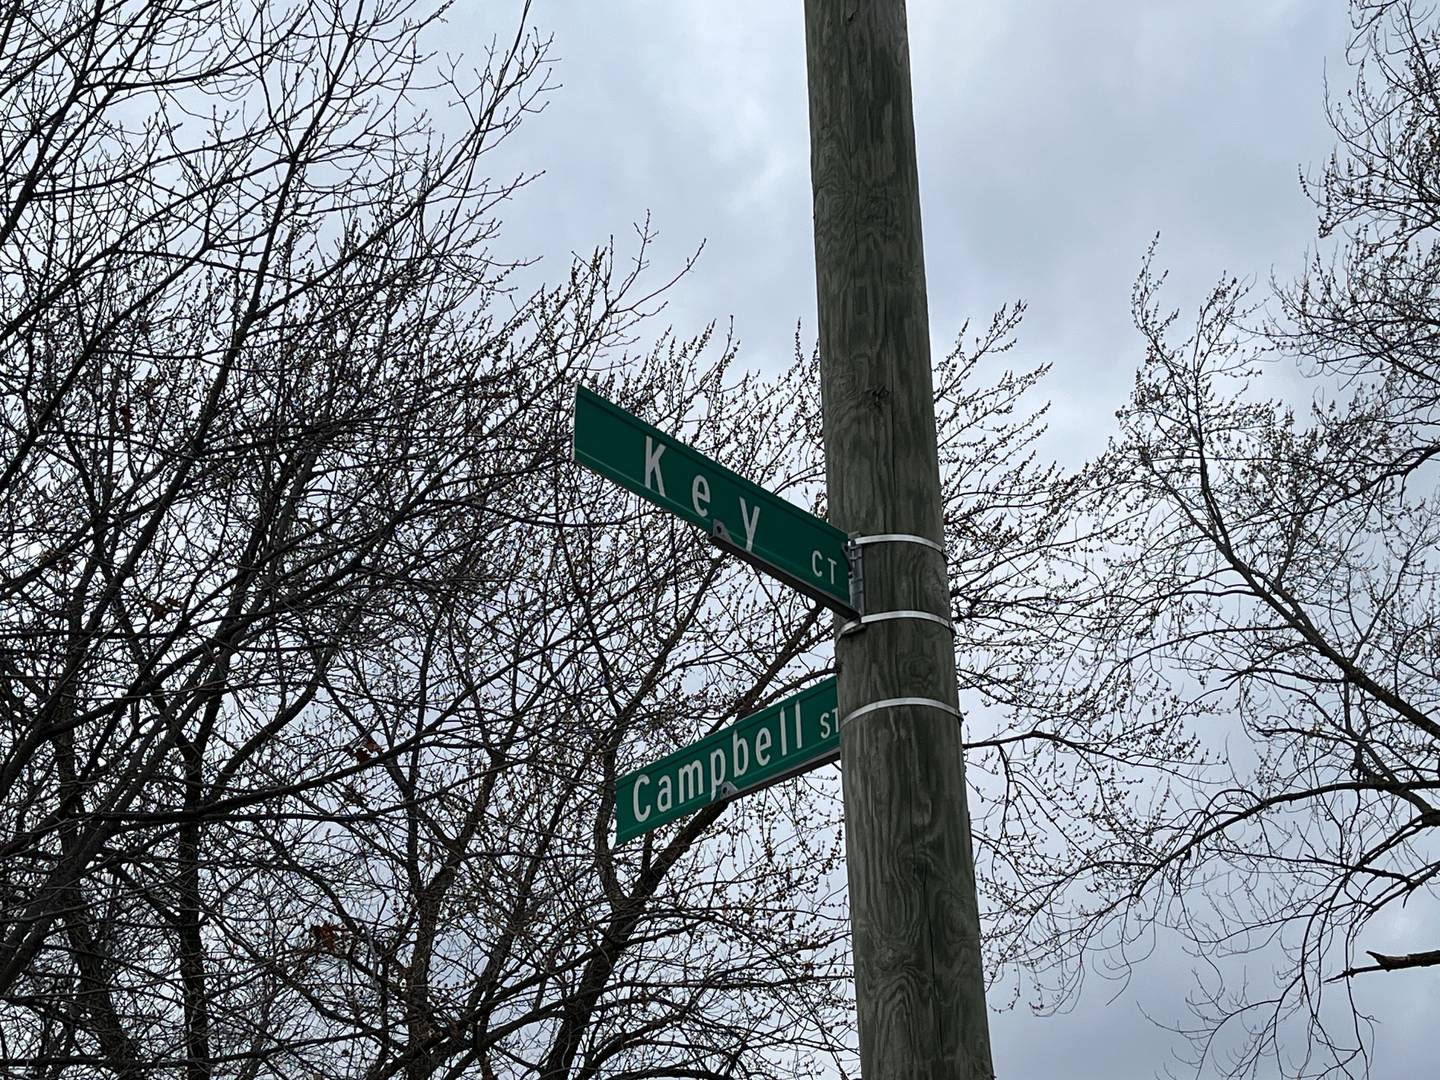 Signs for the intersection of Campbell Street and Key Court in Joliet. A 27-year-old man was wounded in a shooting on Tuesday in the area.